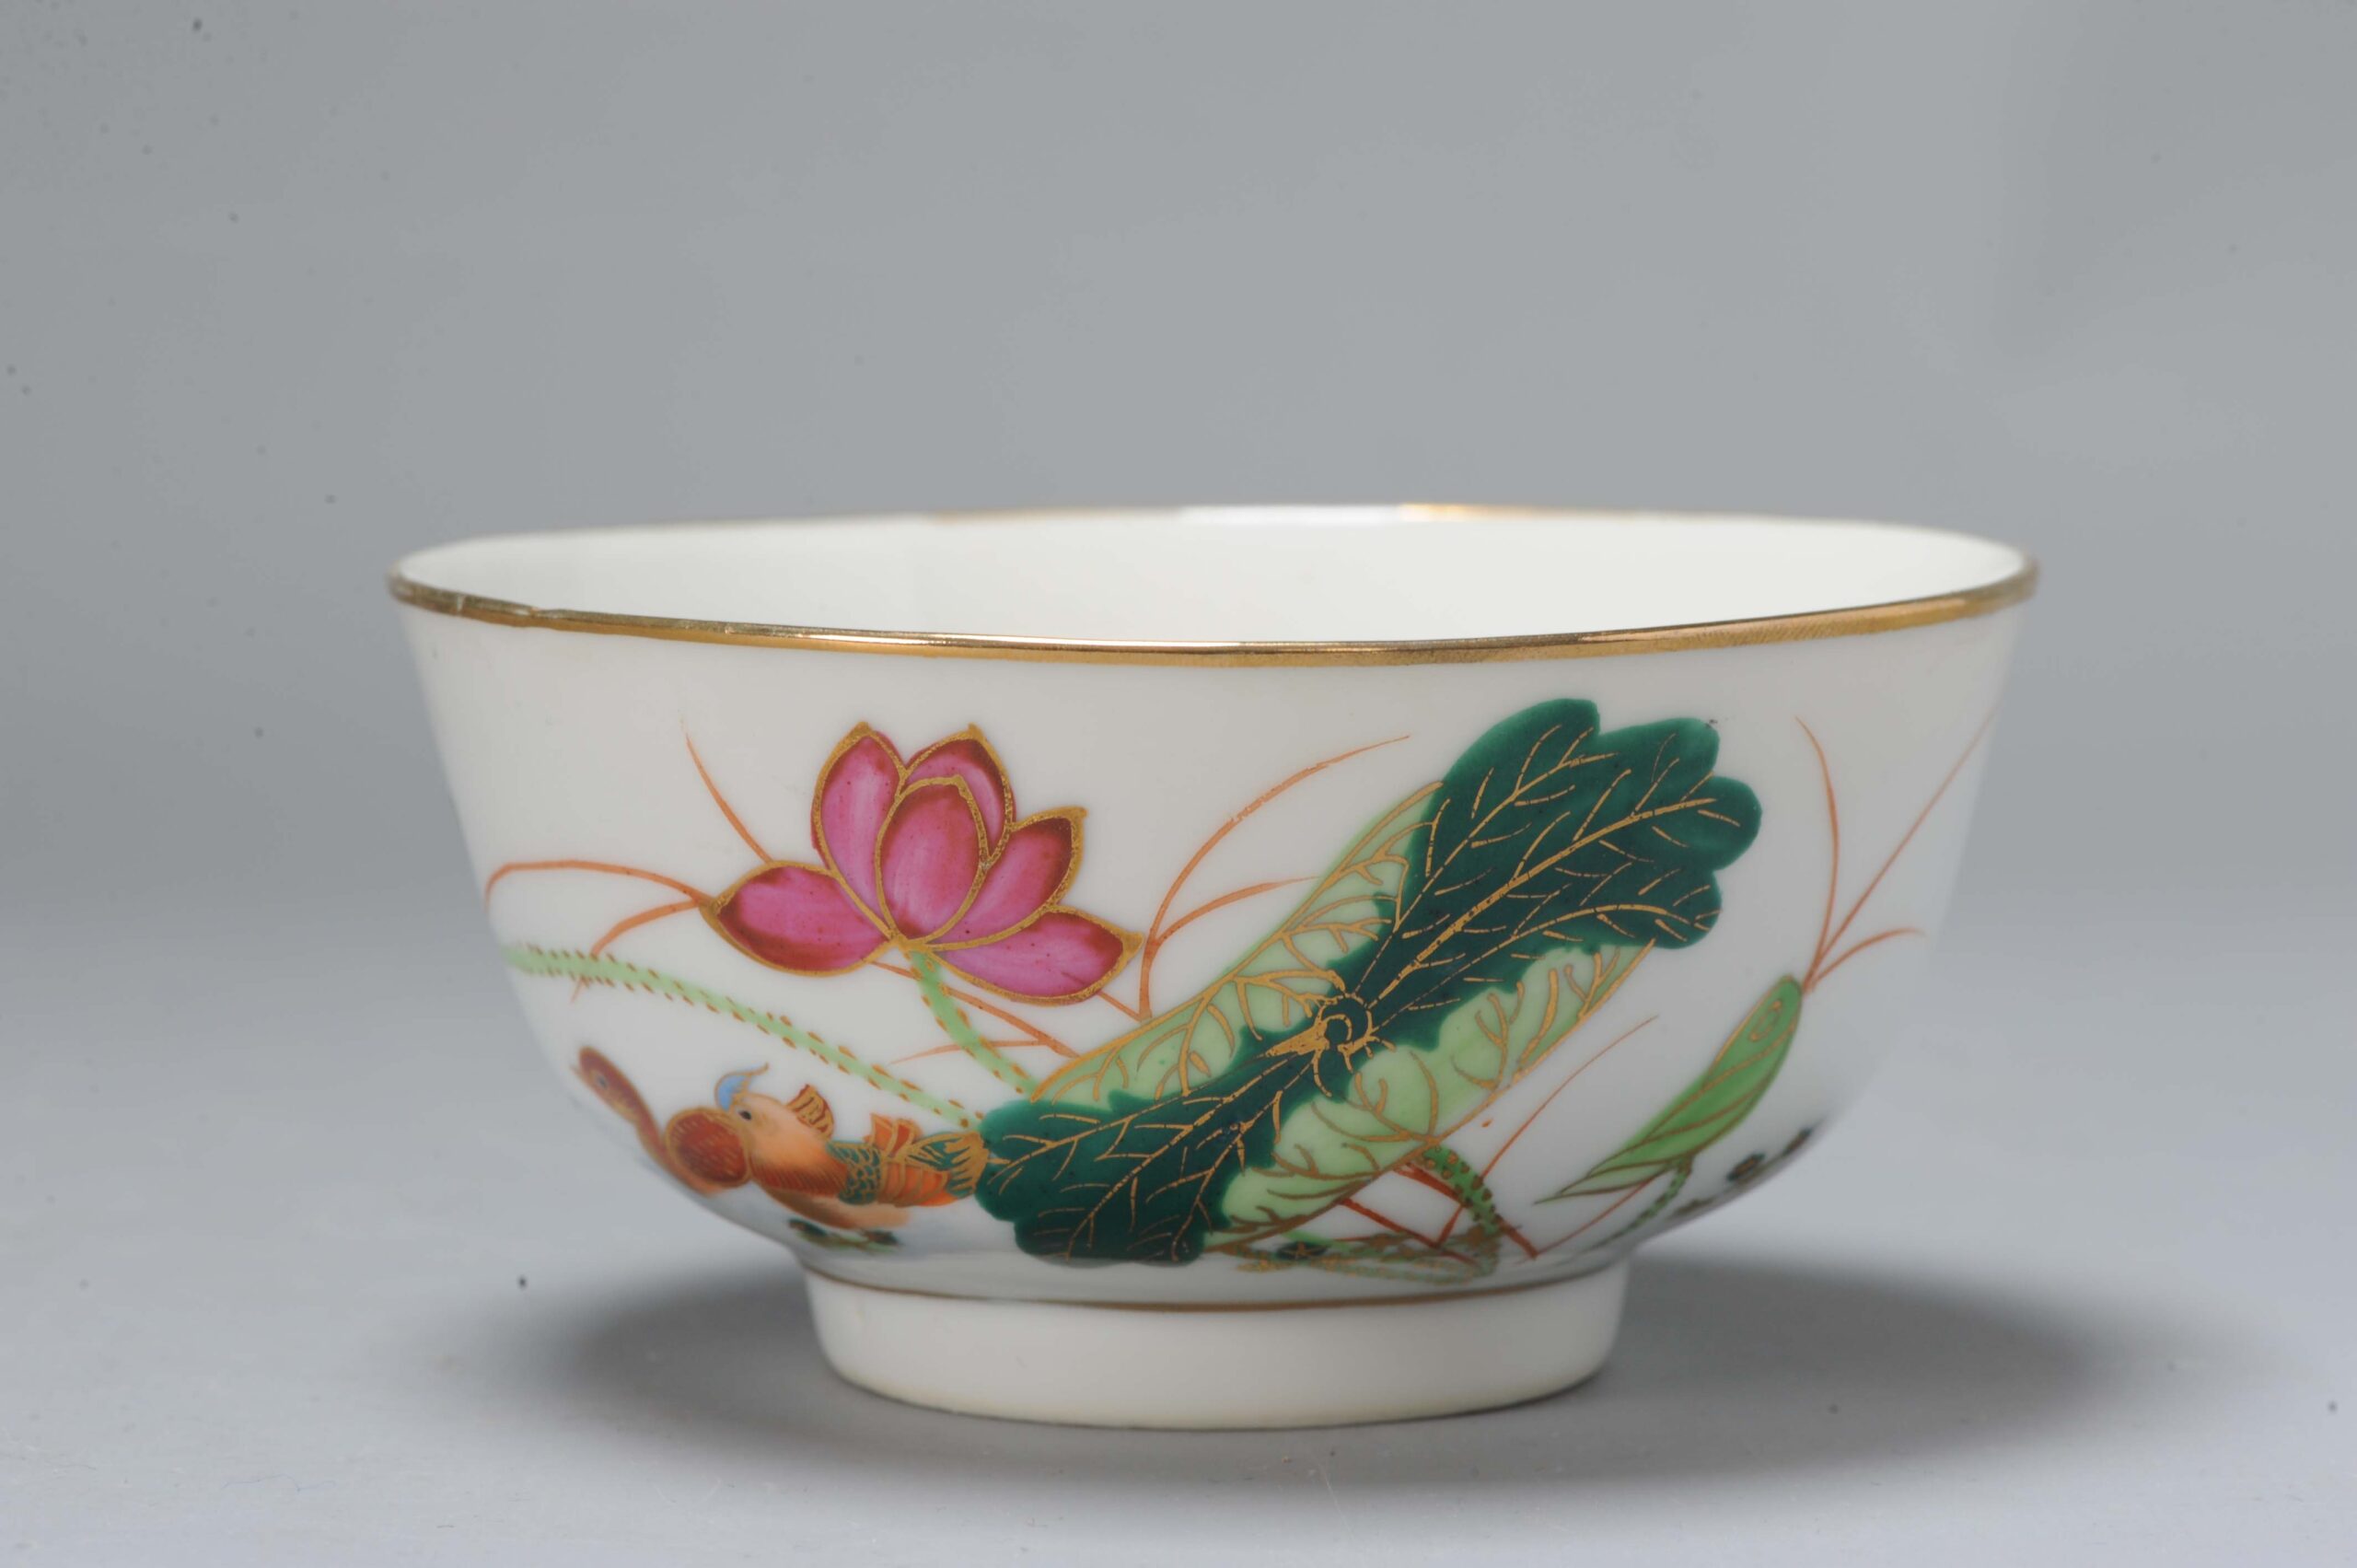 Antique Chinese Republic period Fencai bowl with flowers, China 20th c.